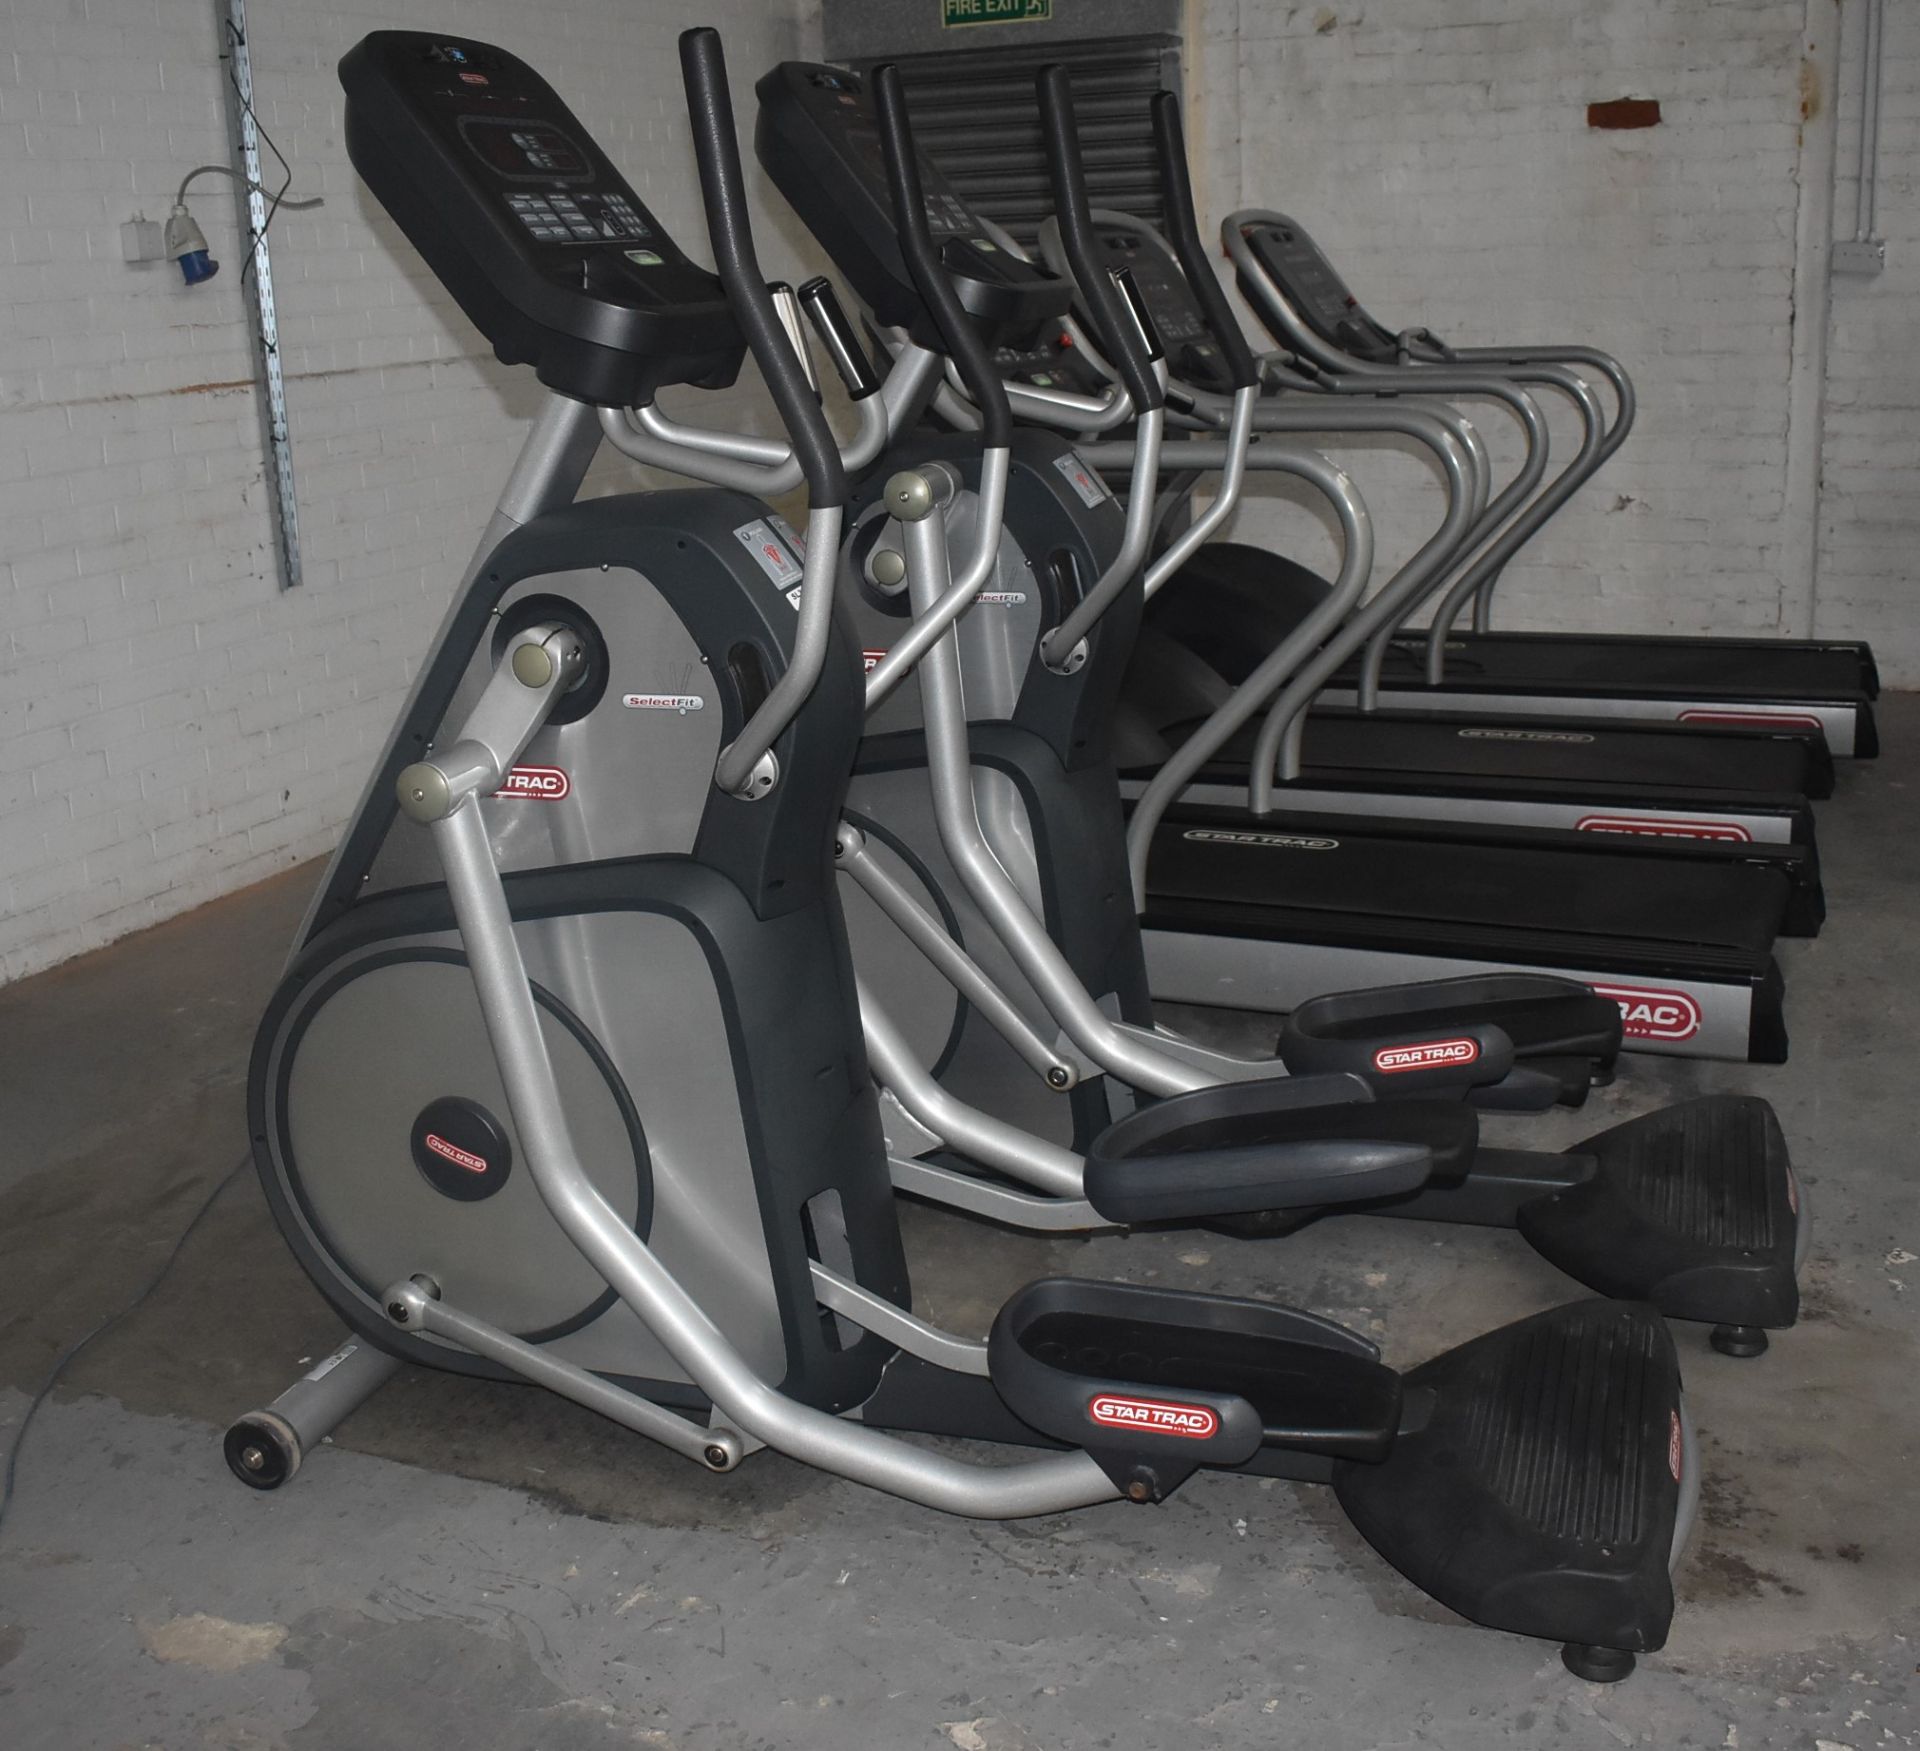 1 x Star Trac Commercial Excercise Elliptical Cross Trainer - CL011 - Ref SL307 GIT -  Location: - Image 9 of 9